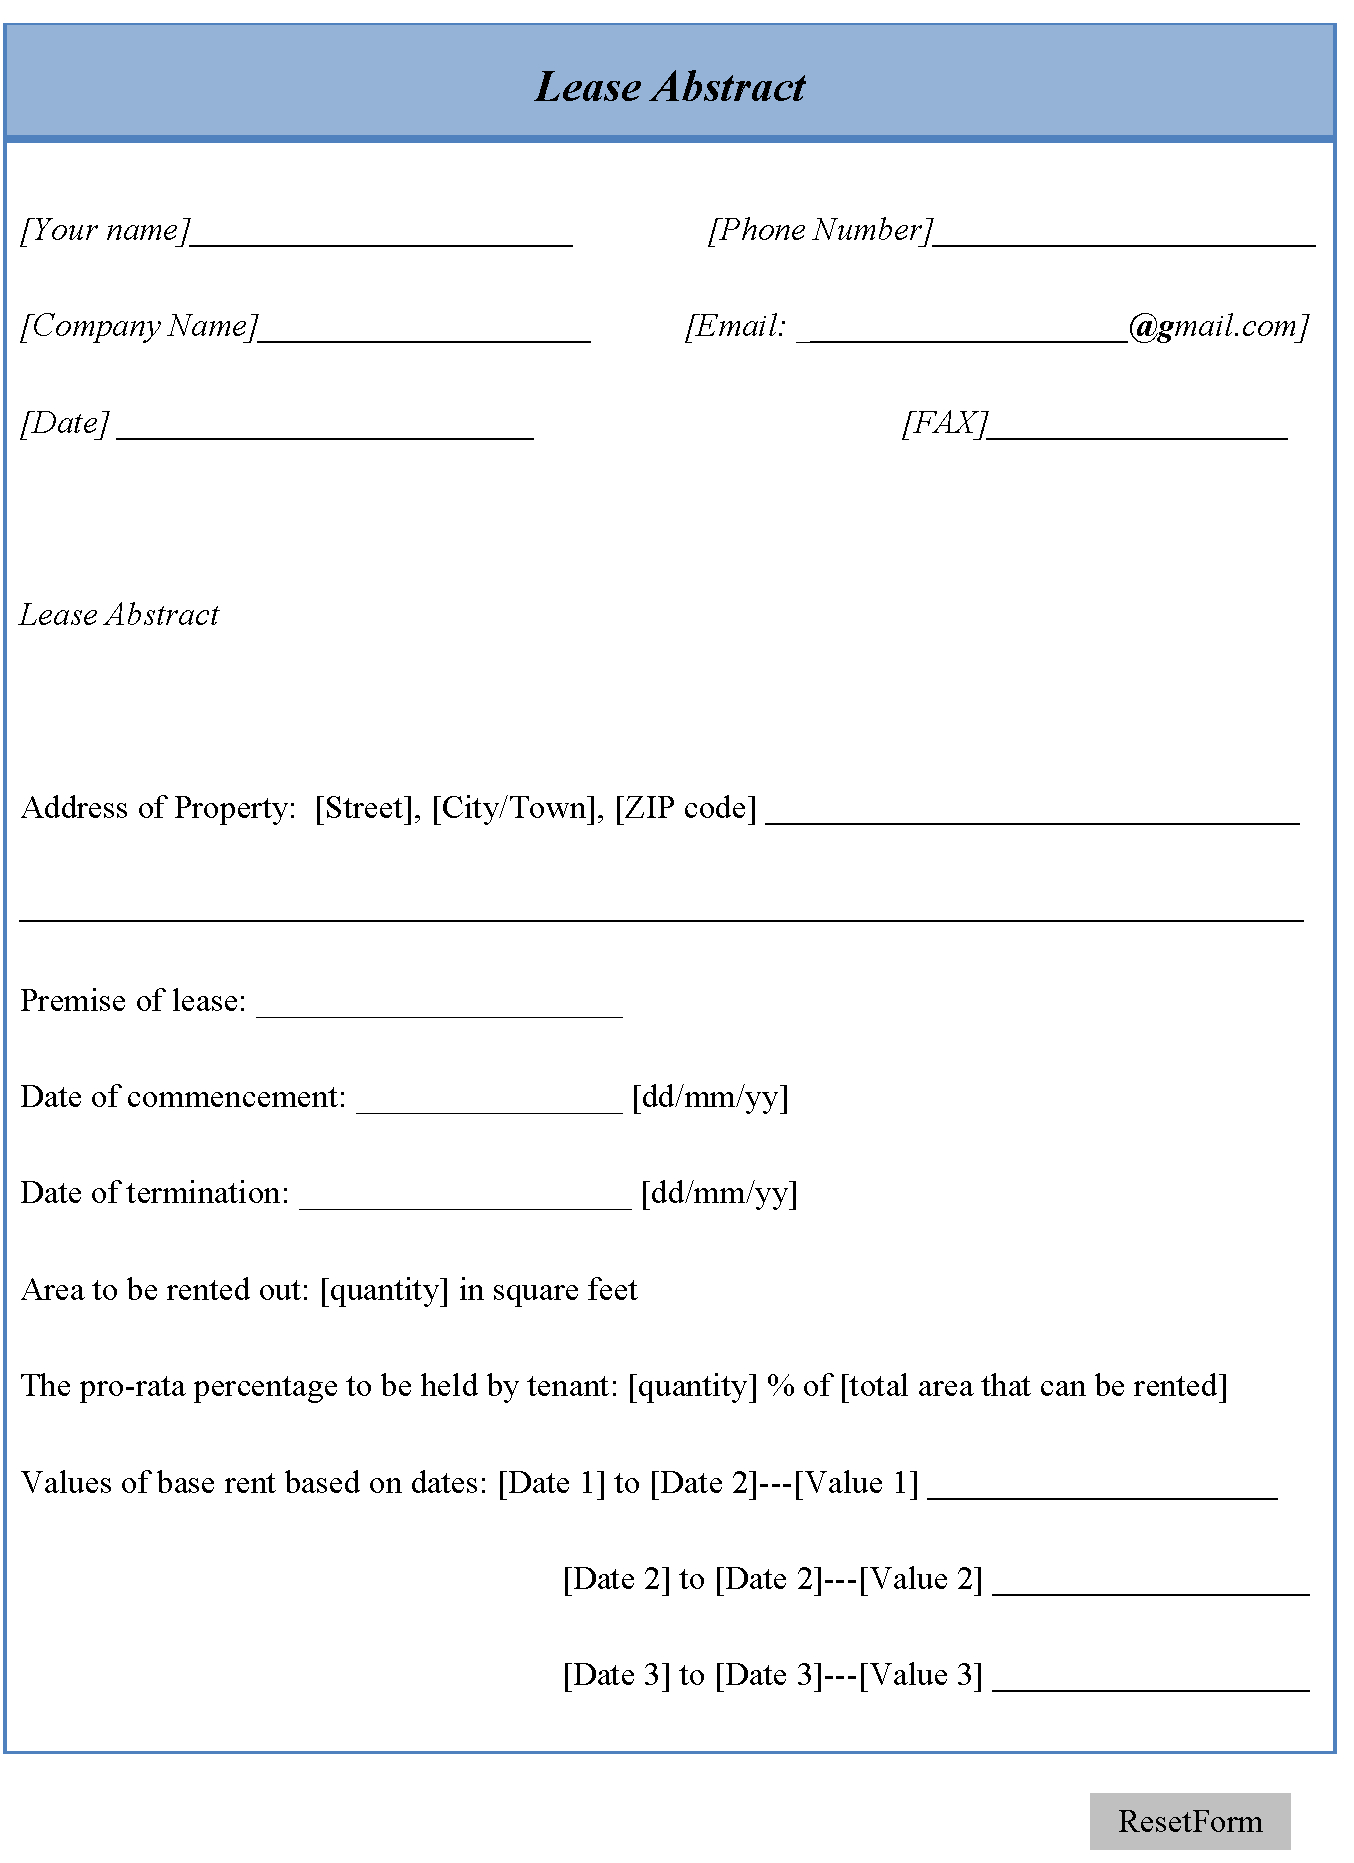 Lease Abstract Template | Editable Forms In Lease Abstract Template